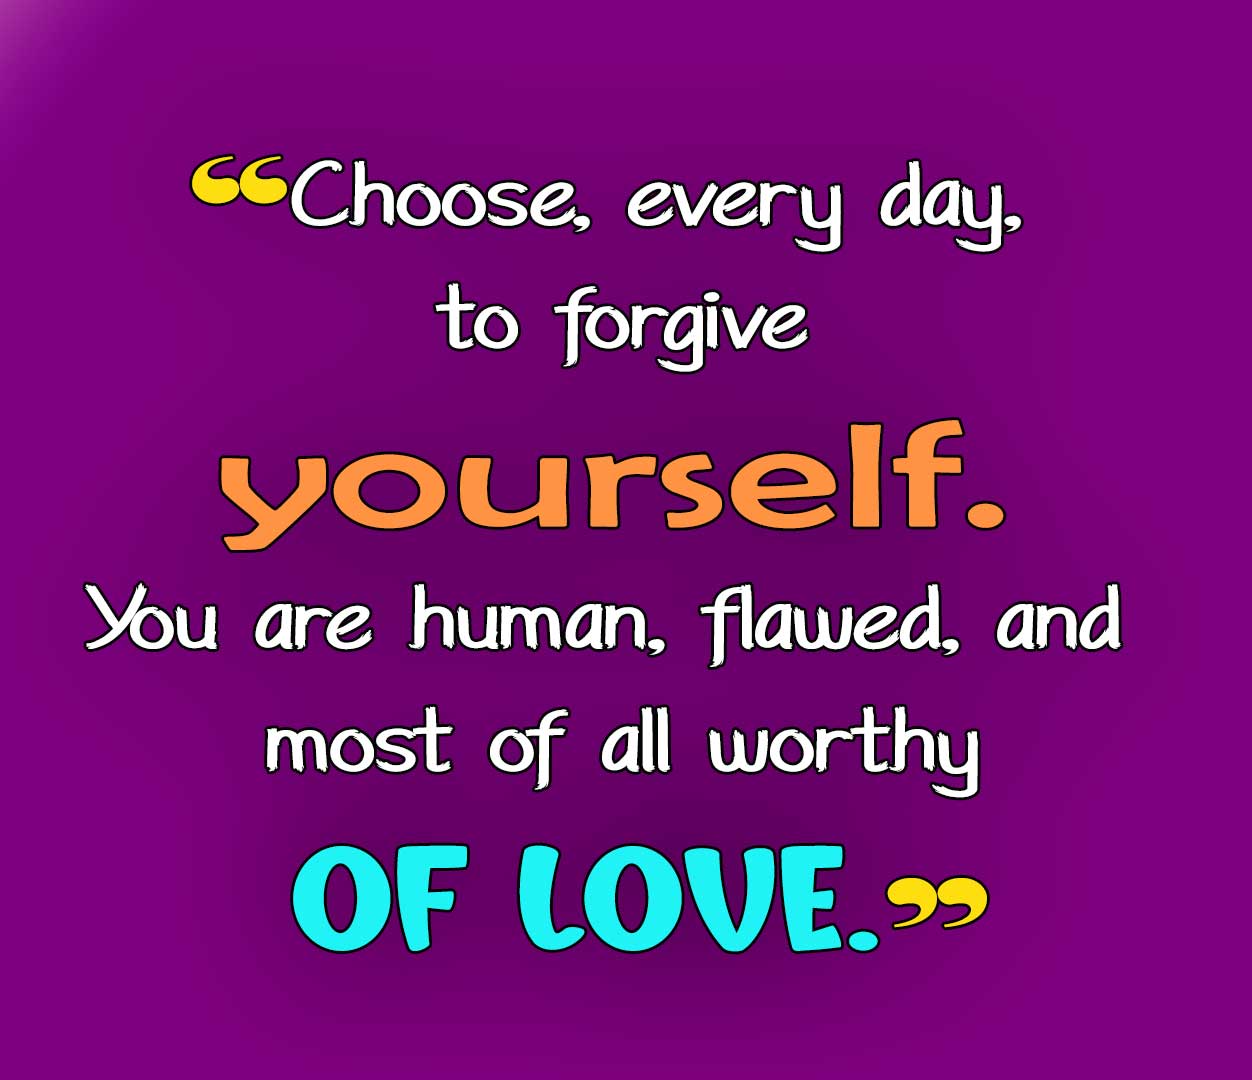 Choose, every day, to forgive yourself. You are human, flawed, and most of all worthy of love.